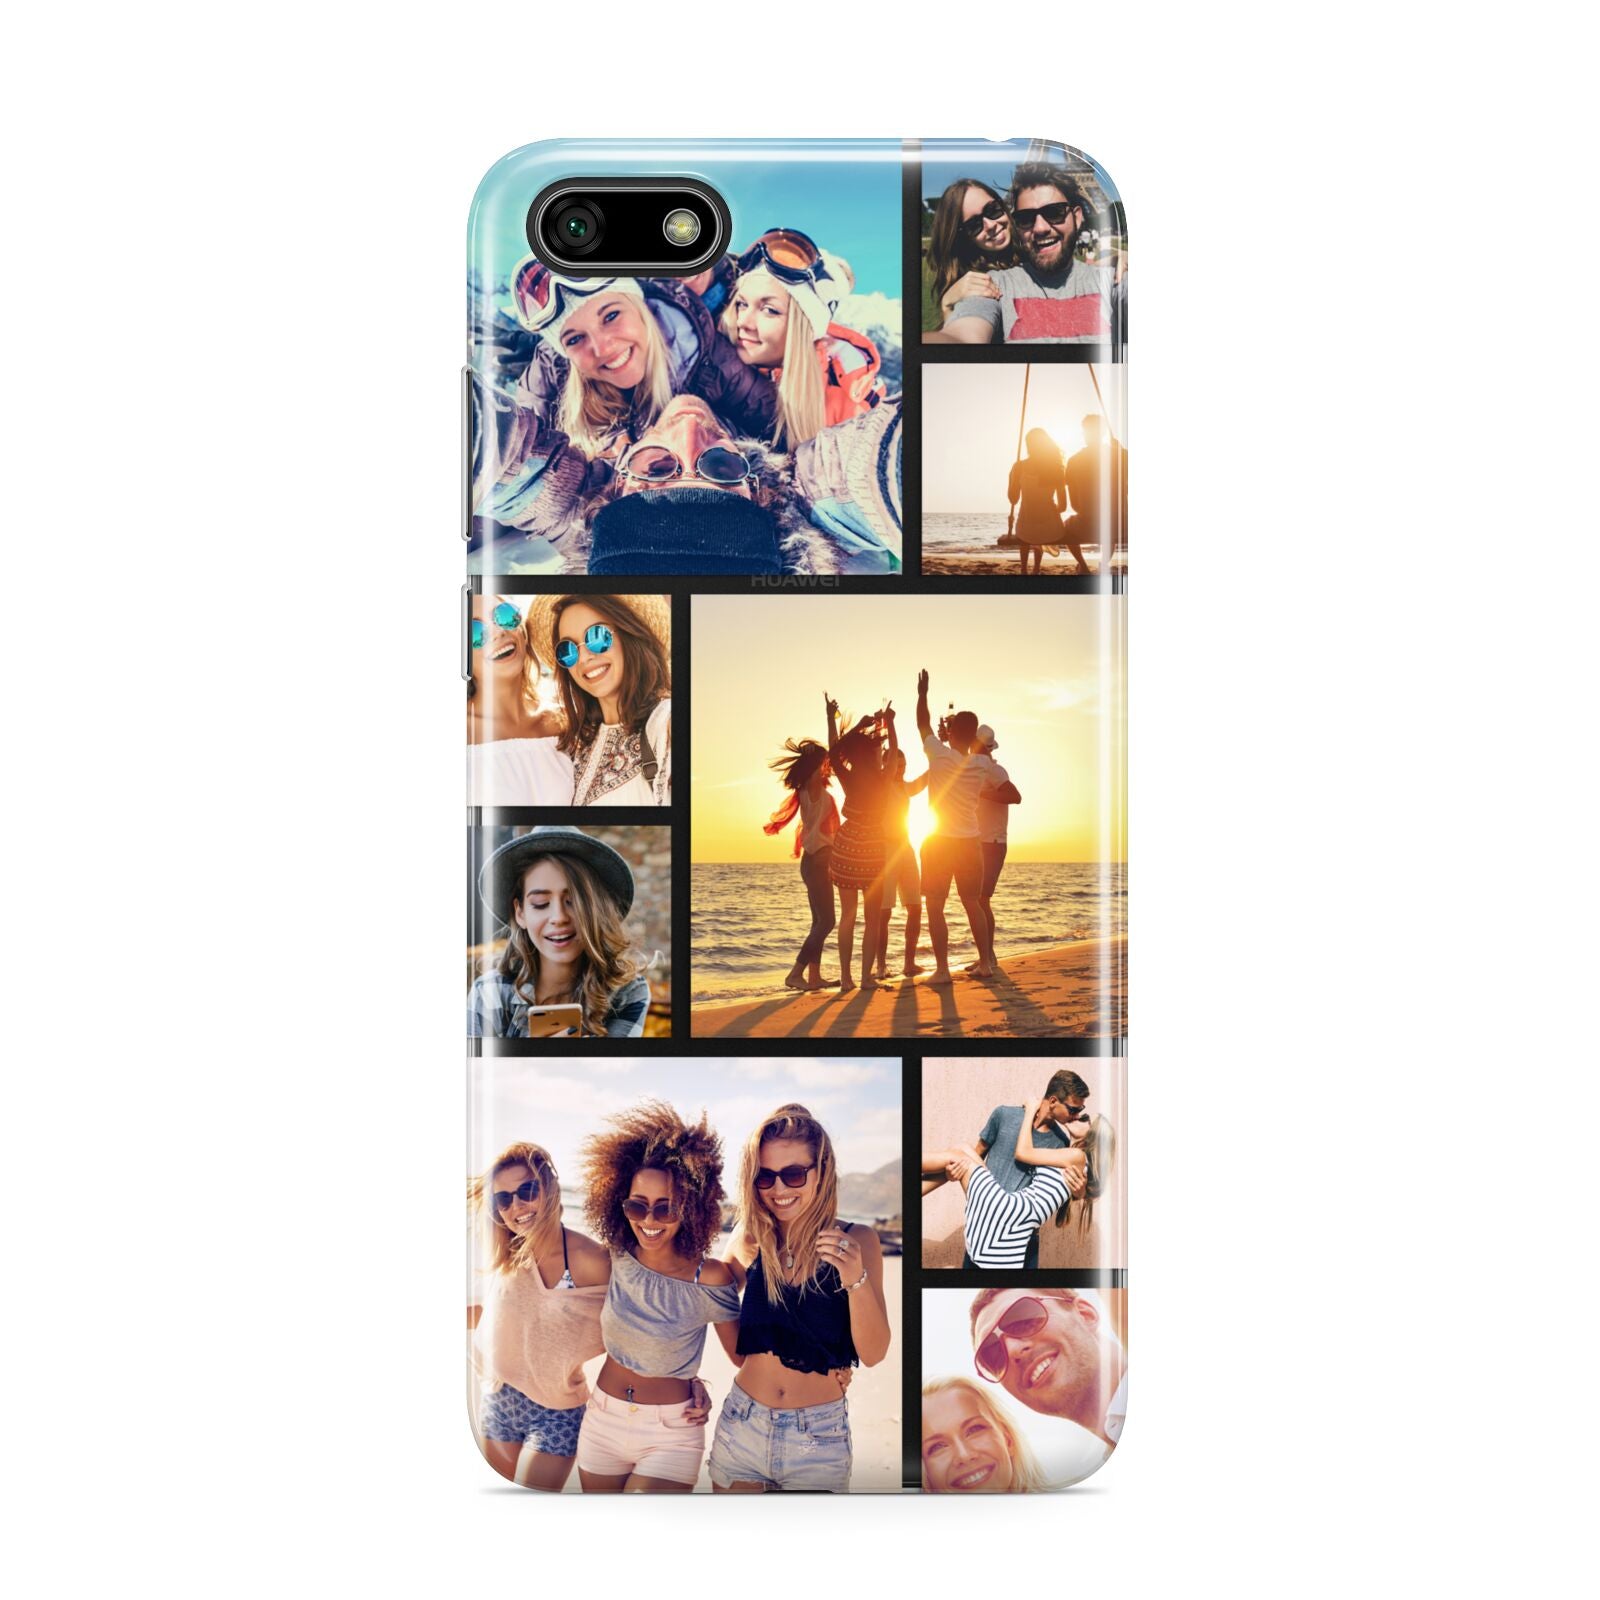 Abstract Photo Collage Upload Huawei Y5 Prime 2018 Phone Case